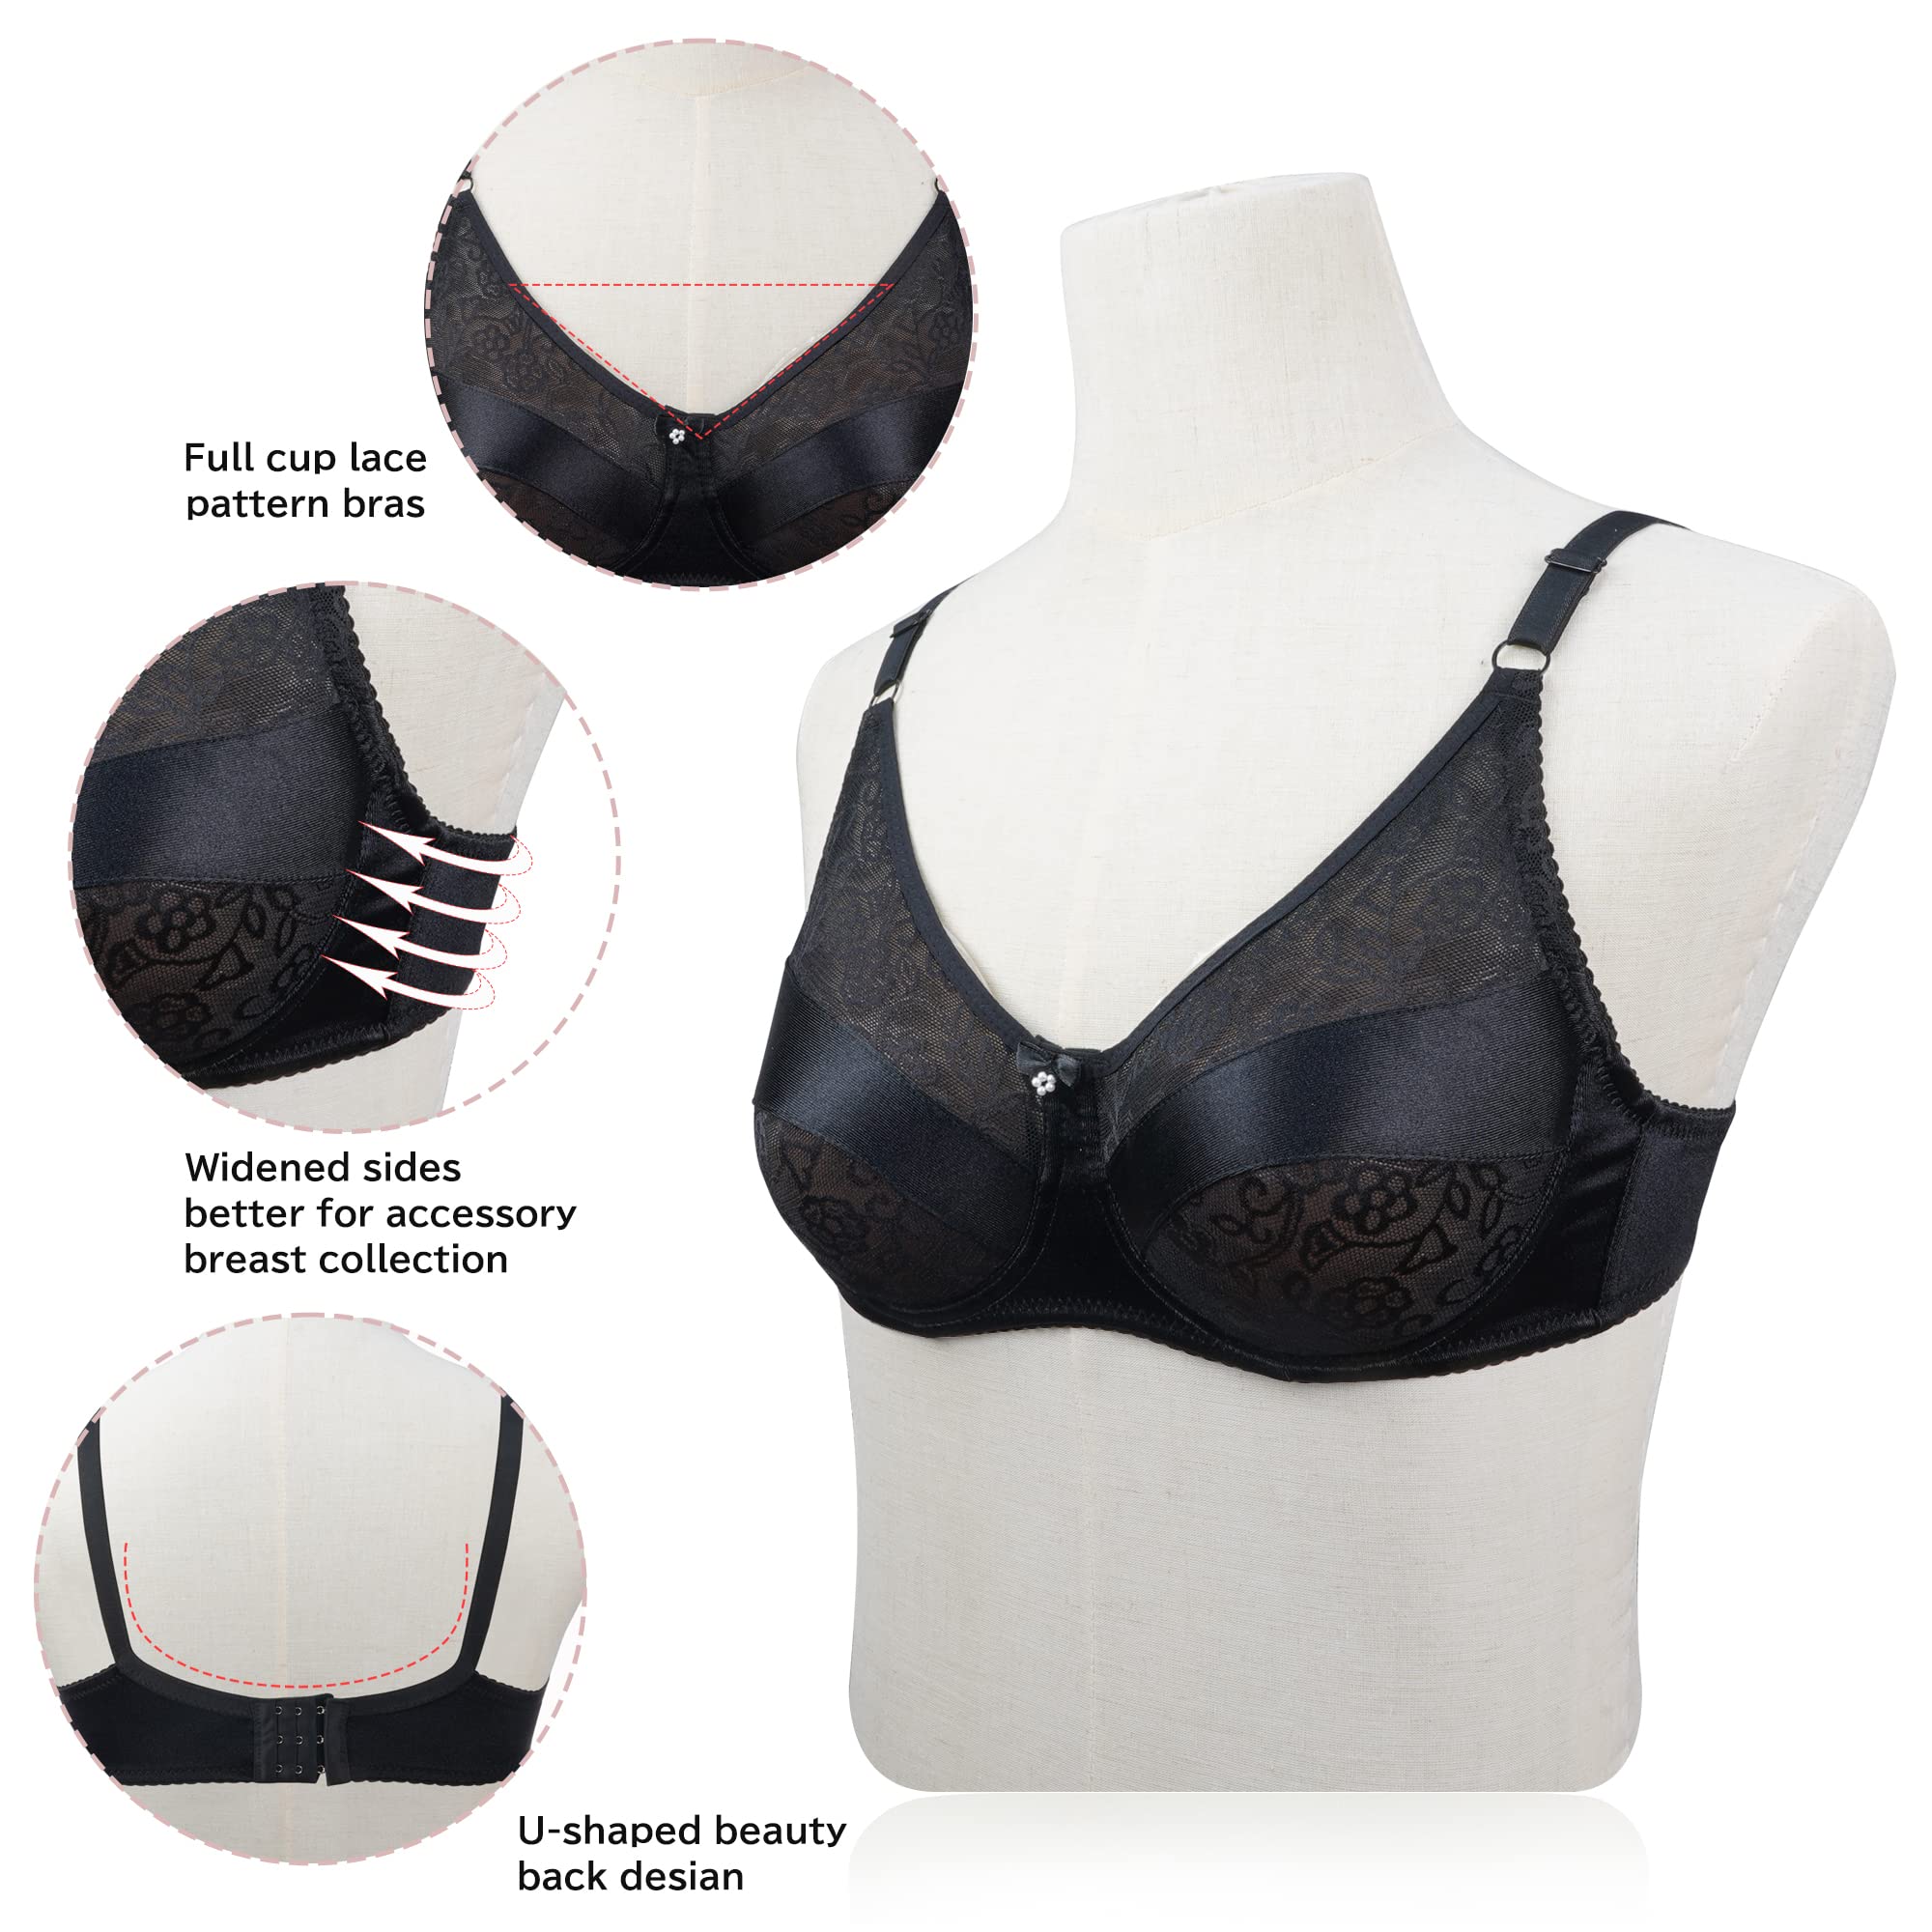 Pocket Bra for Crossdressing Mastectomy Prosthesis Breast Forms Underwired Post-Surgery Bra Black 46/105D